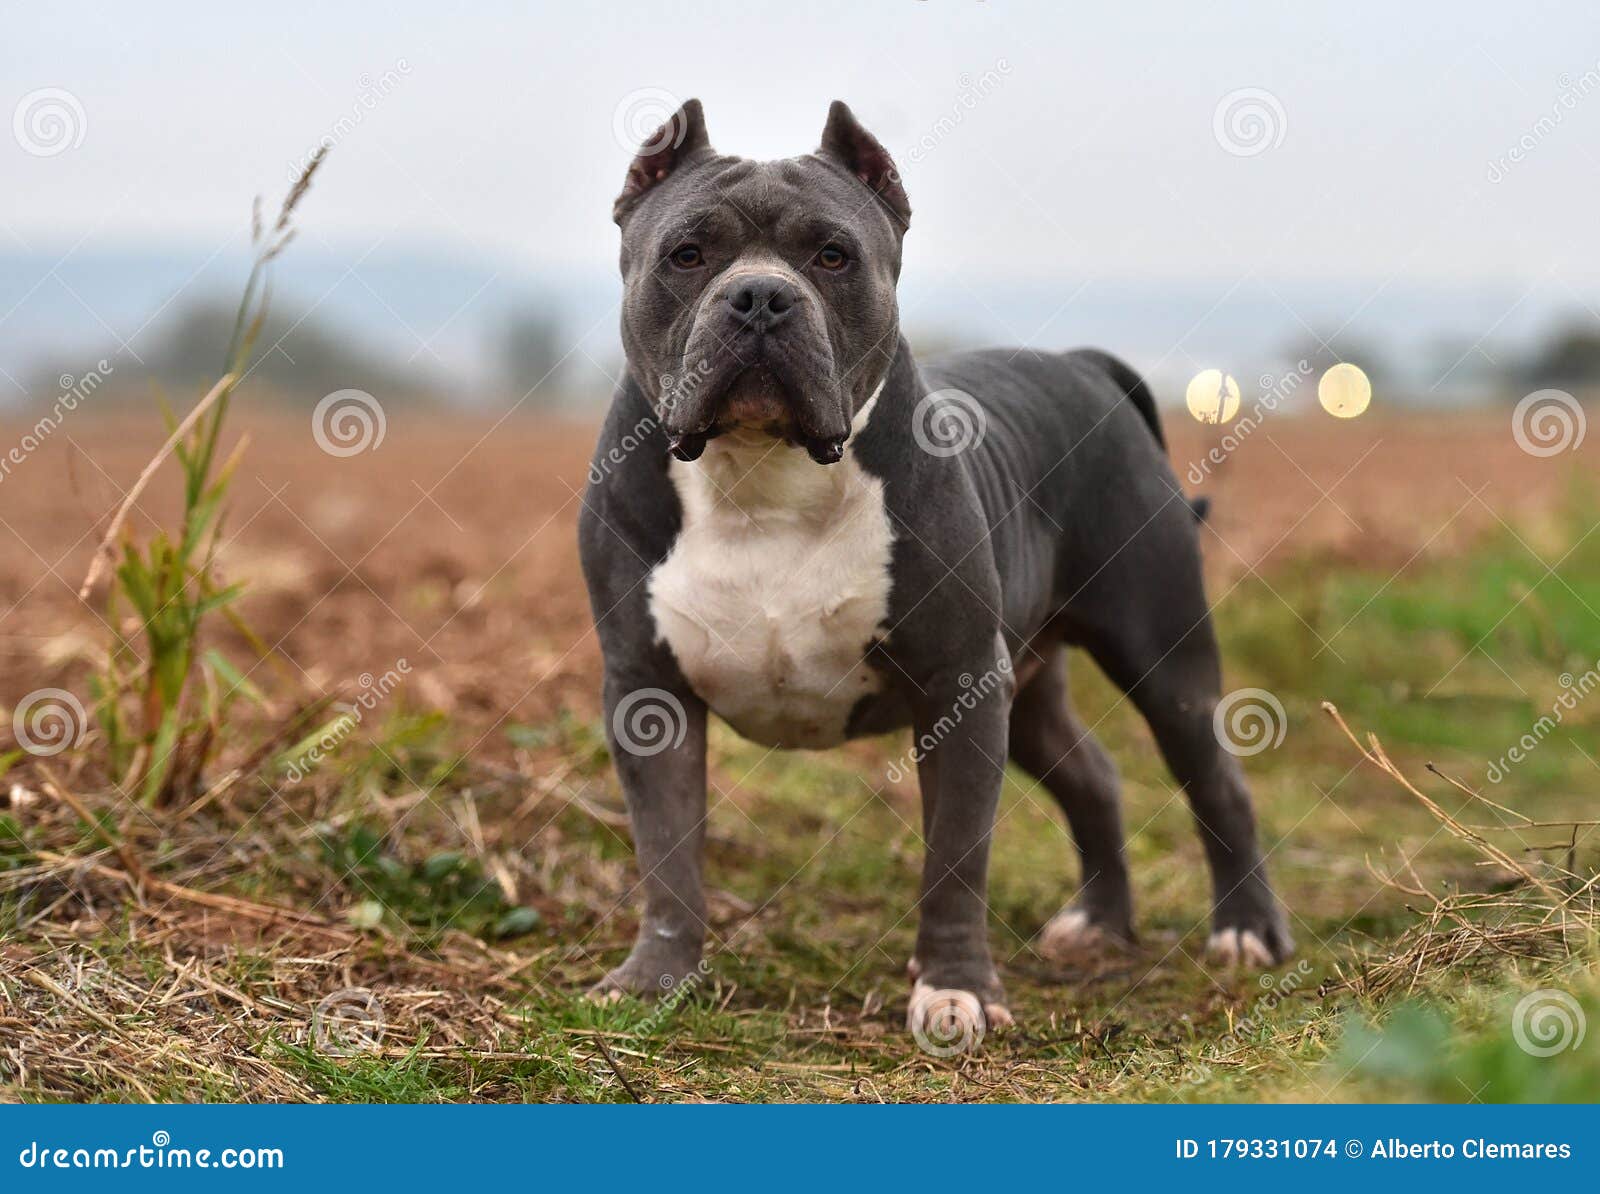 A Strong American Bully Dog Stock Photo - Image of fence, purebred:  179327458